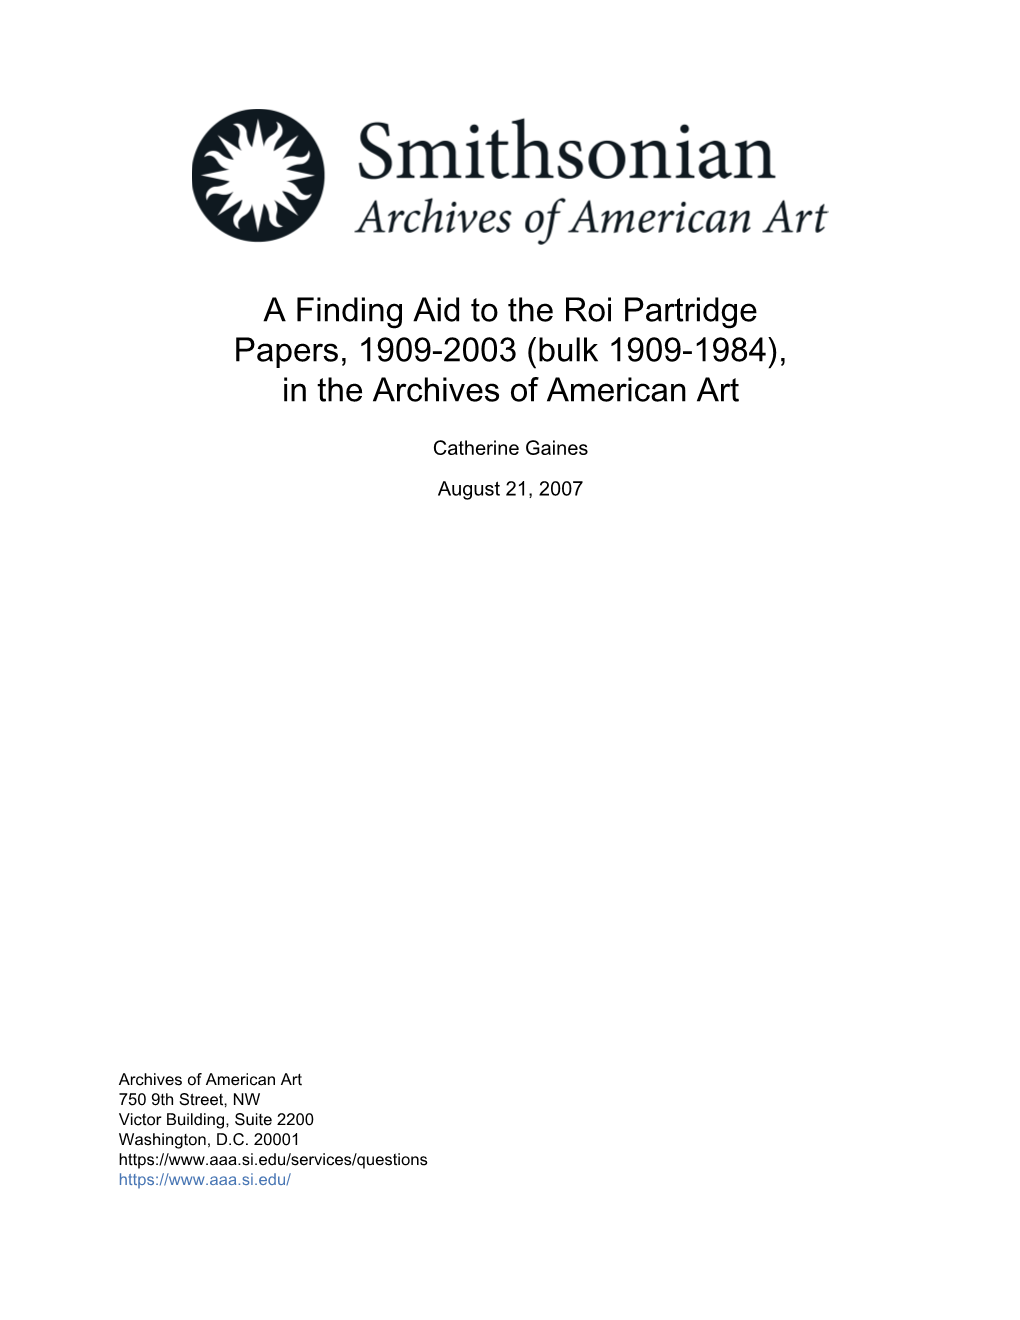 A Finding Aid to the Roi Partridge Papers, 1909-2003 (Bulk 1909-1984), in the Archives of American Art